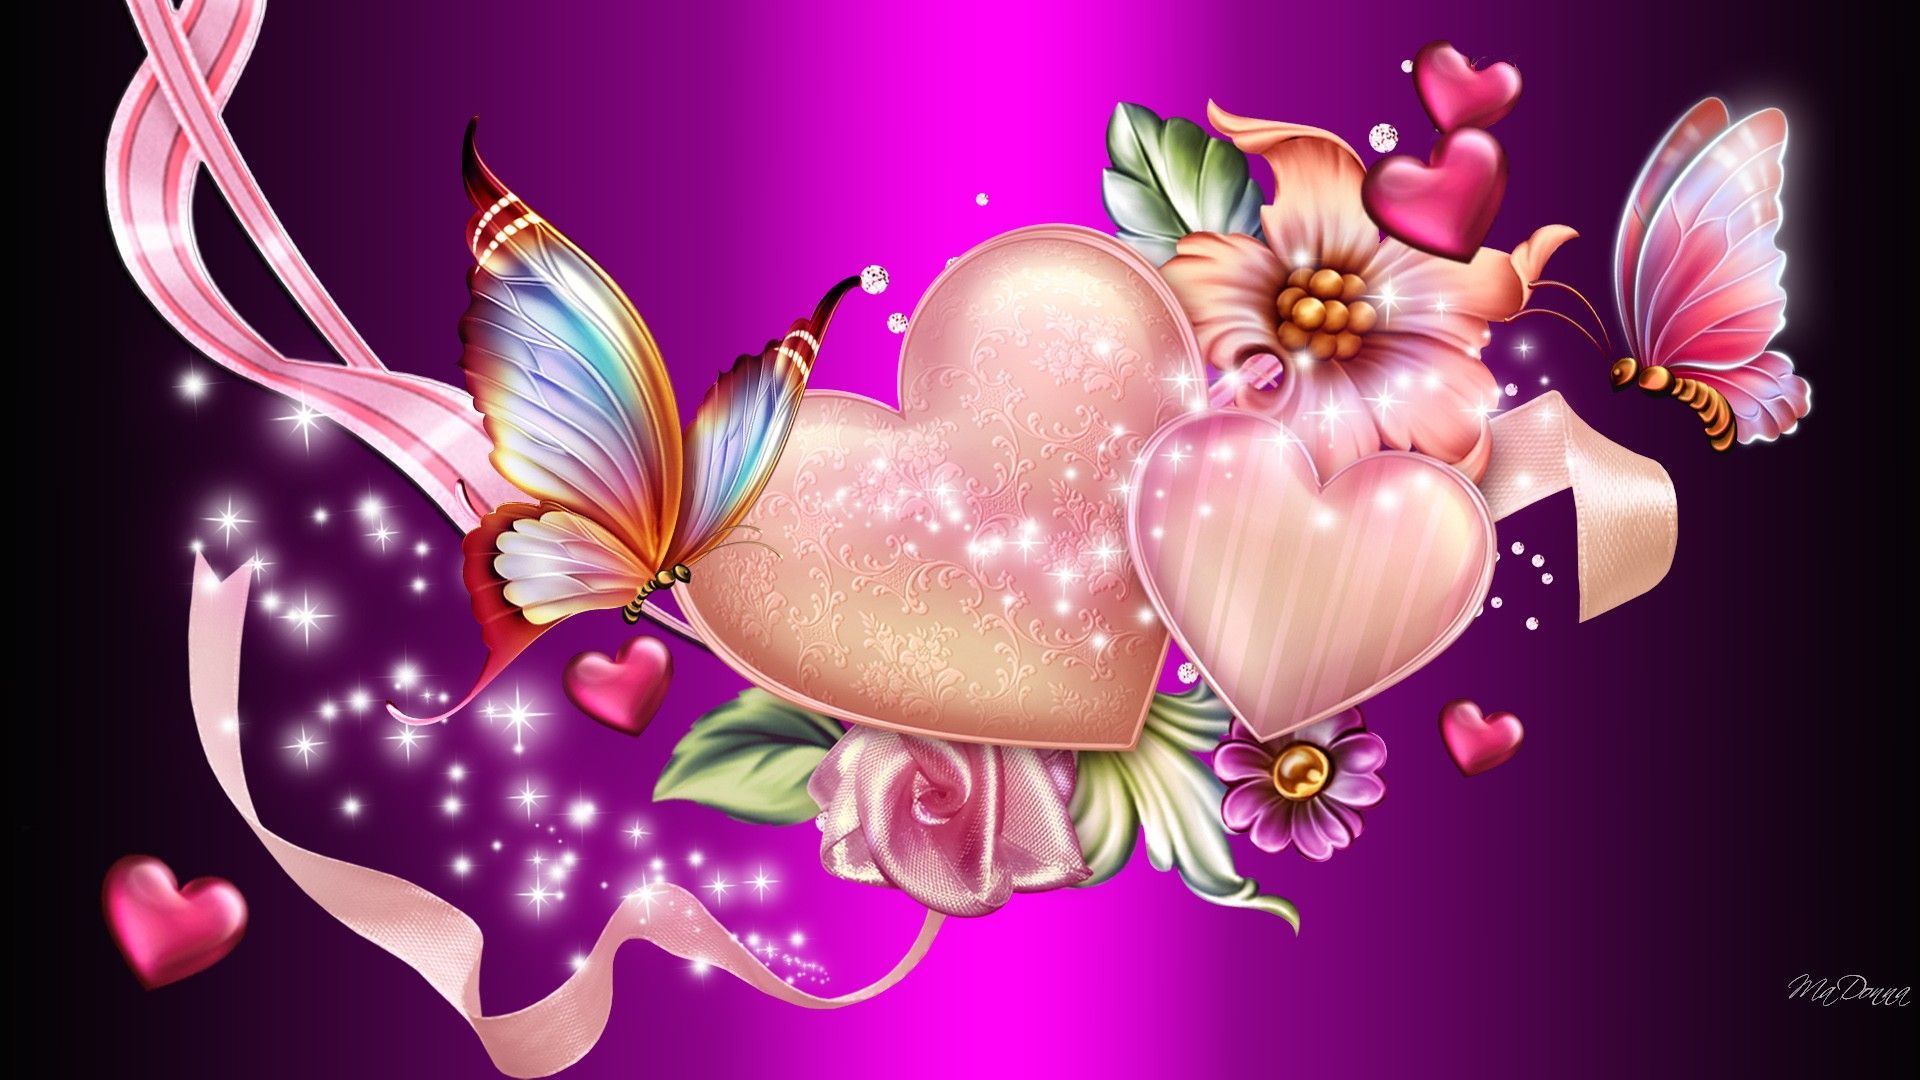 Artistic Heart Artistic Abstract Pink Butterfly Sparkles Flower Wallpaper